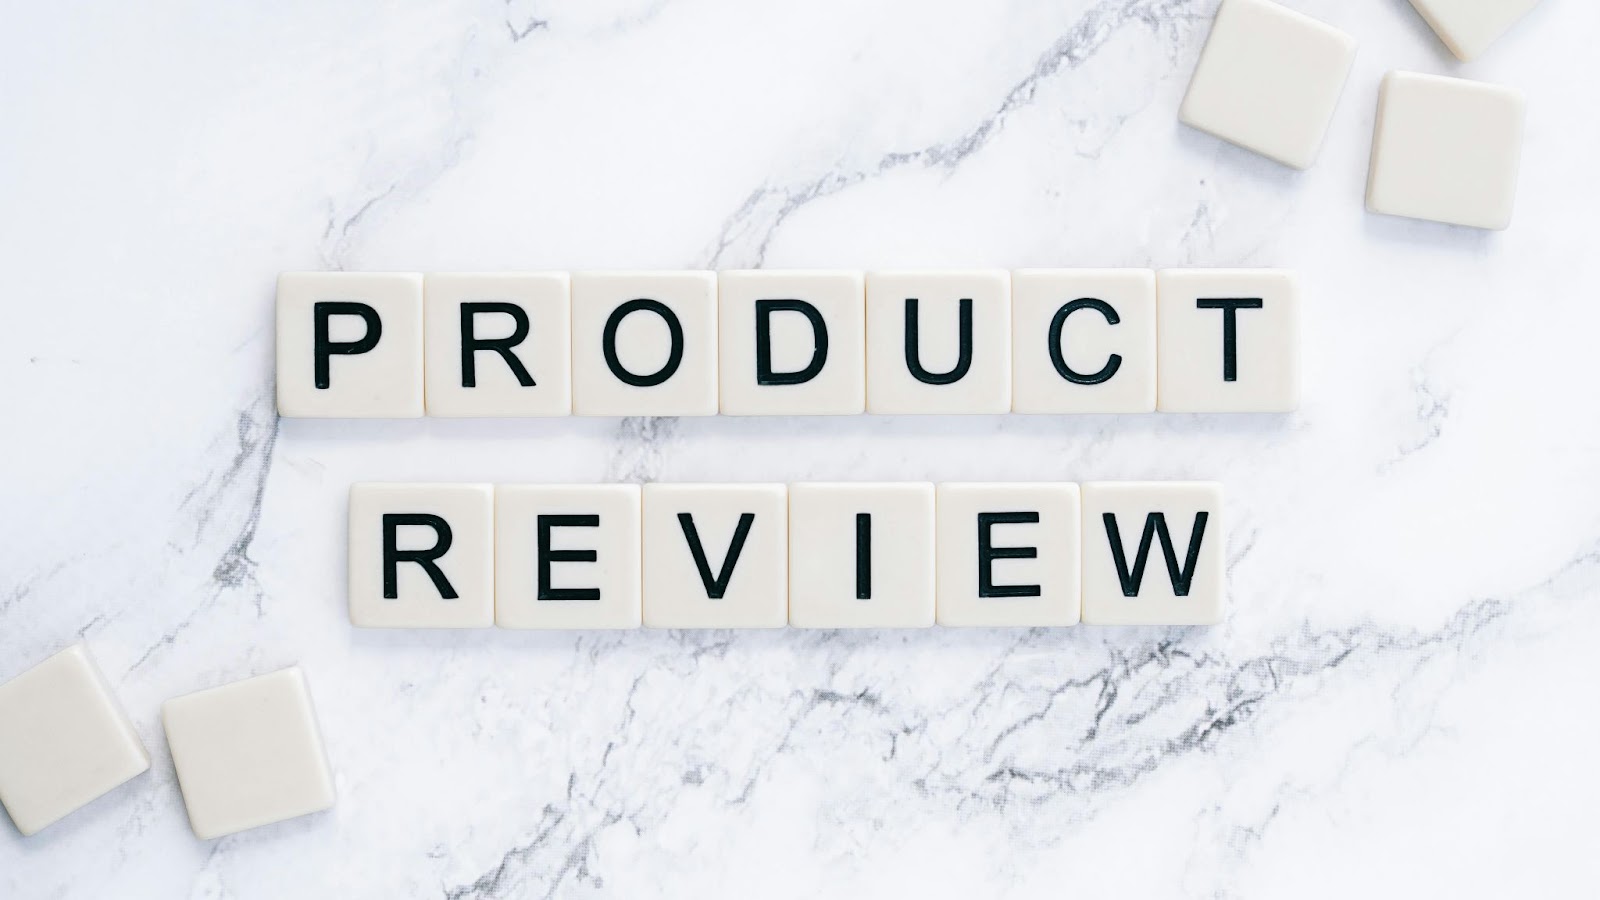 Product review tiles on white marbled background for All Things Austria